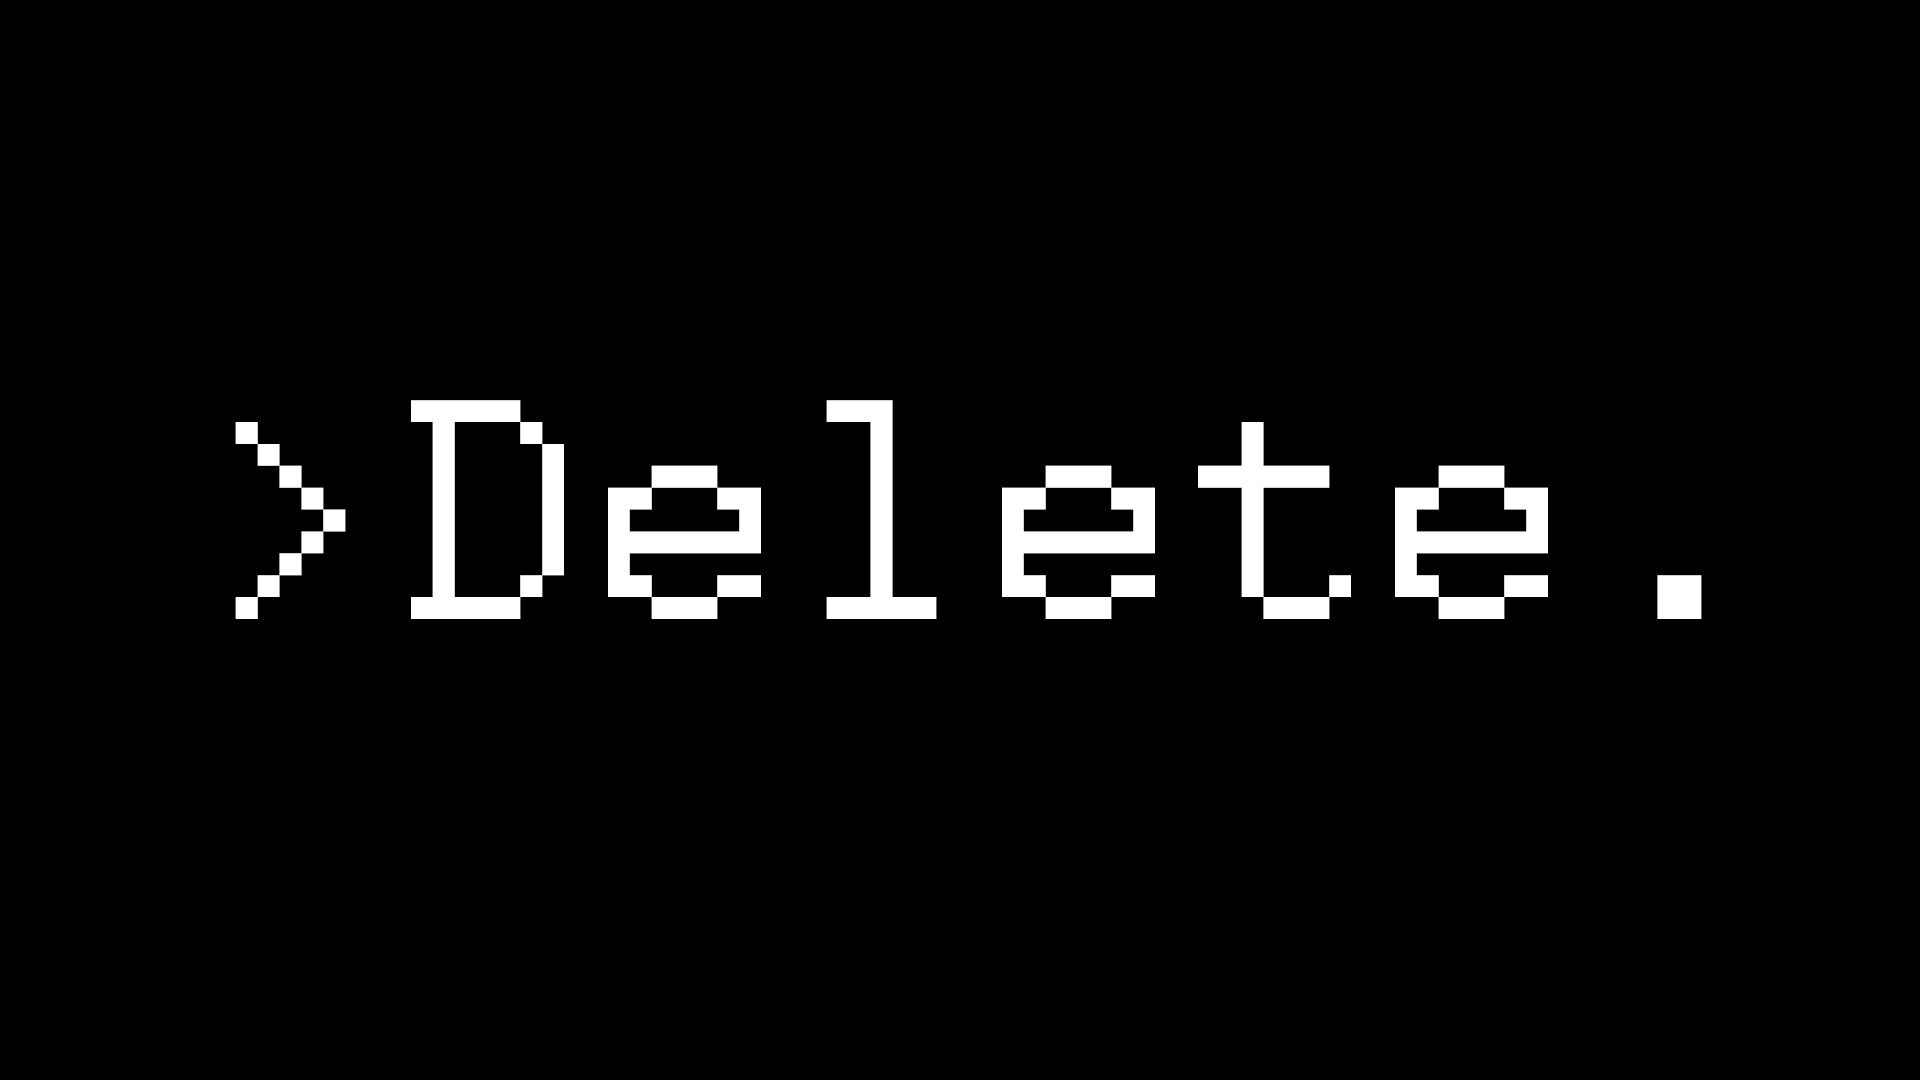 [Deleted]